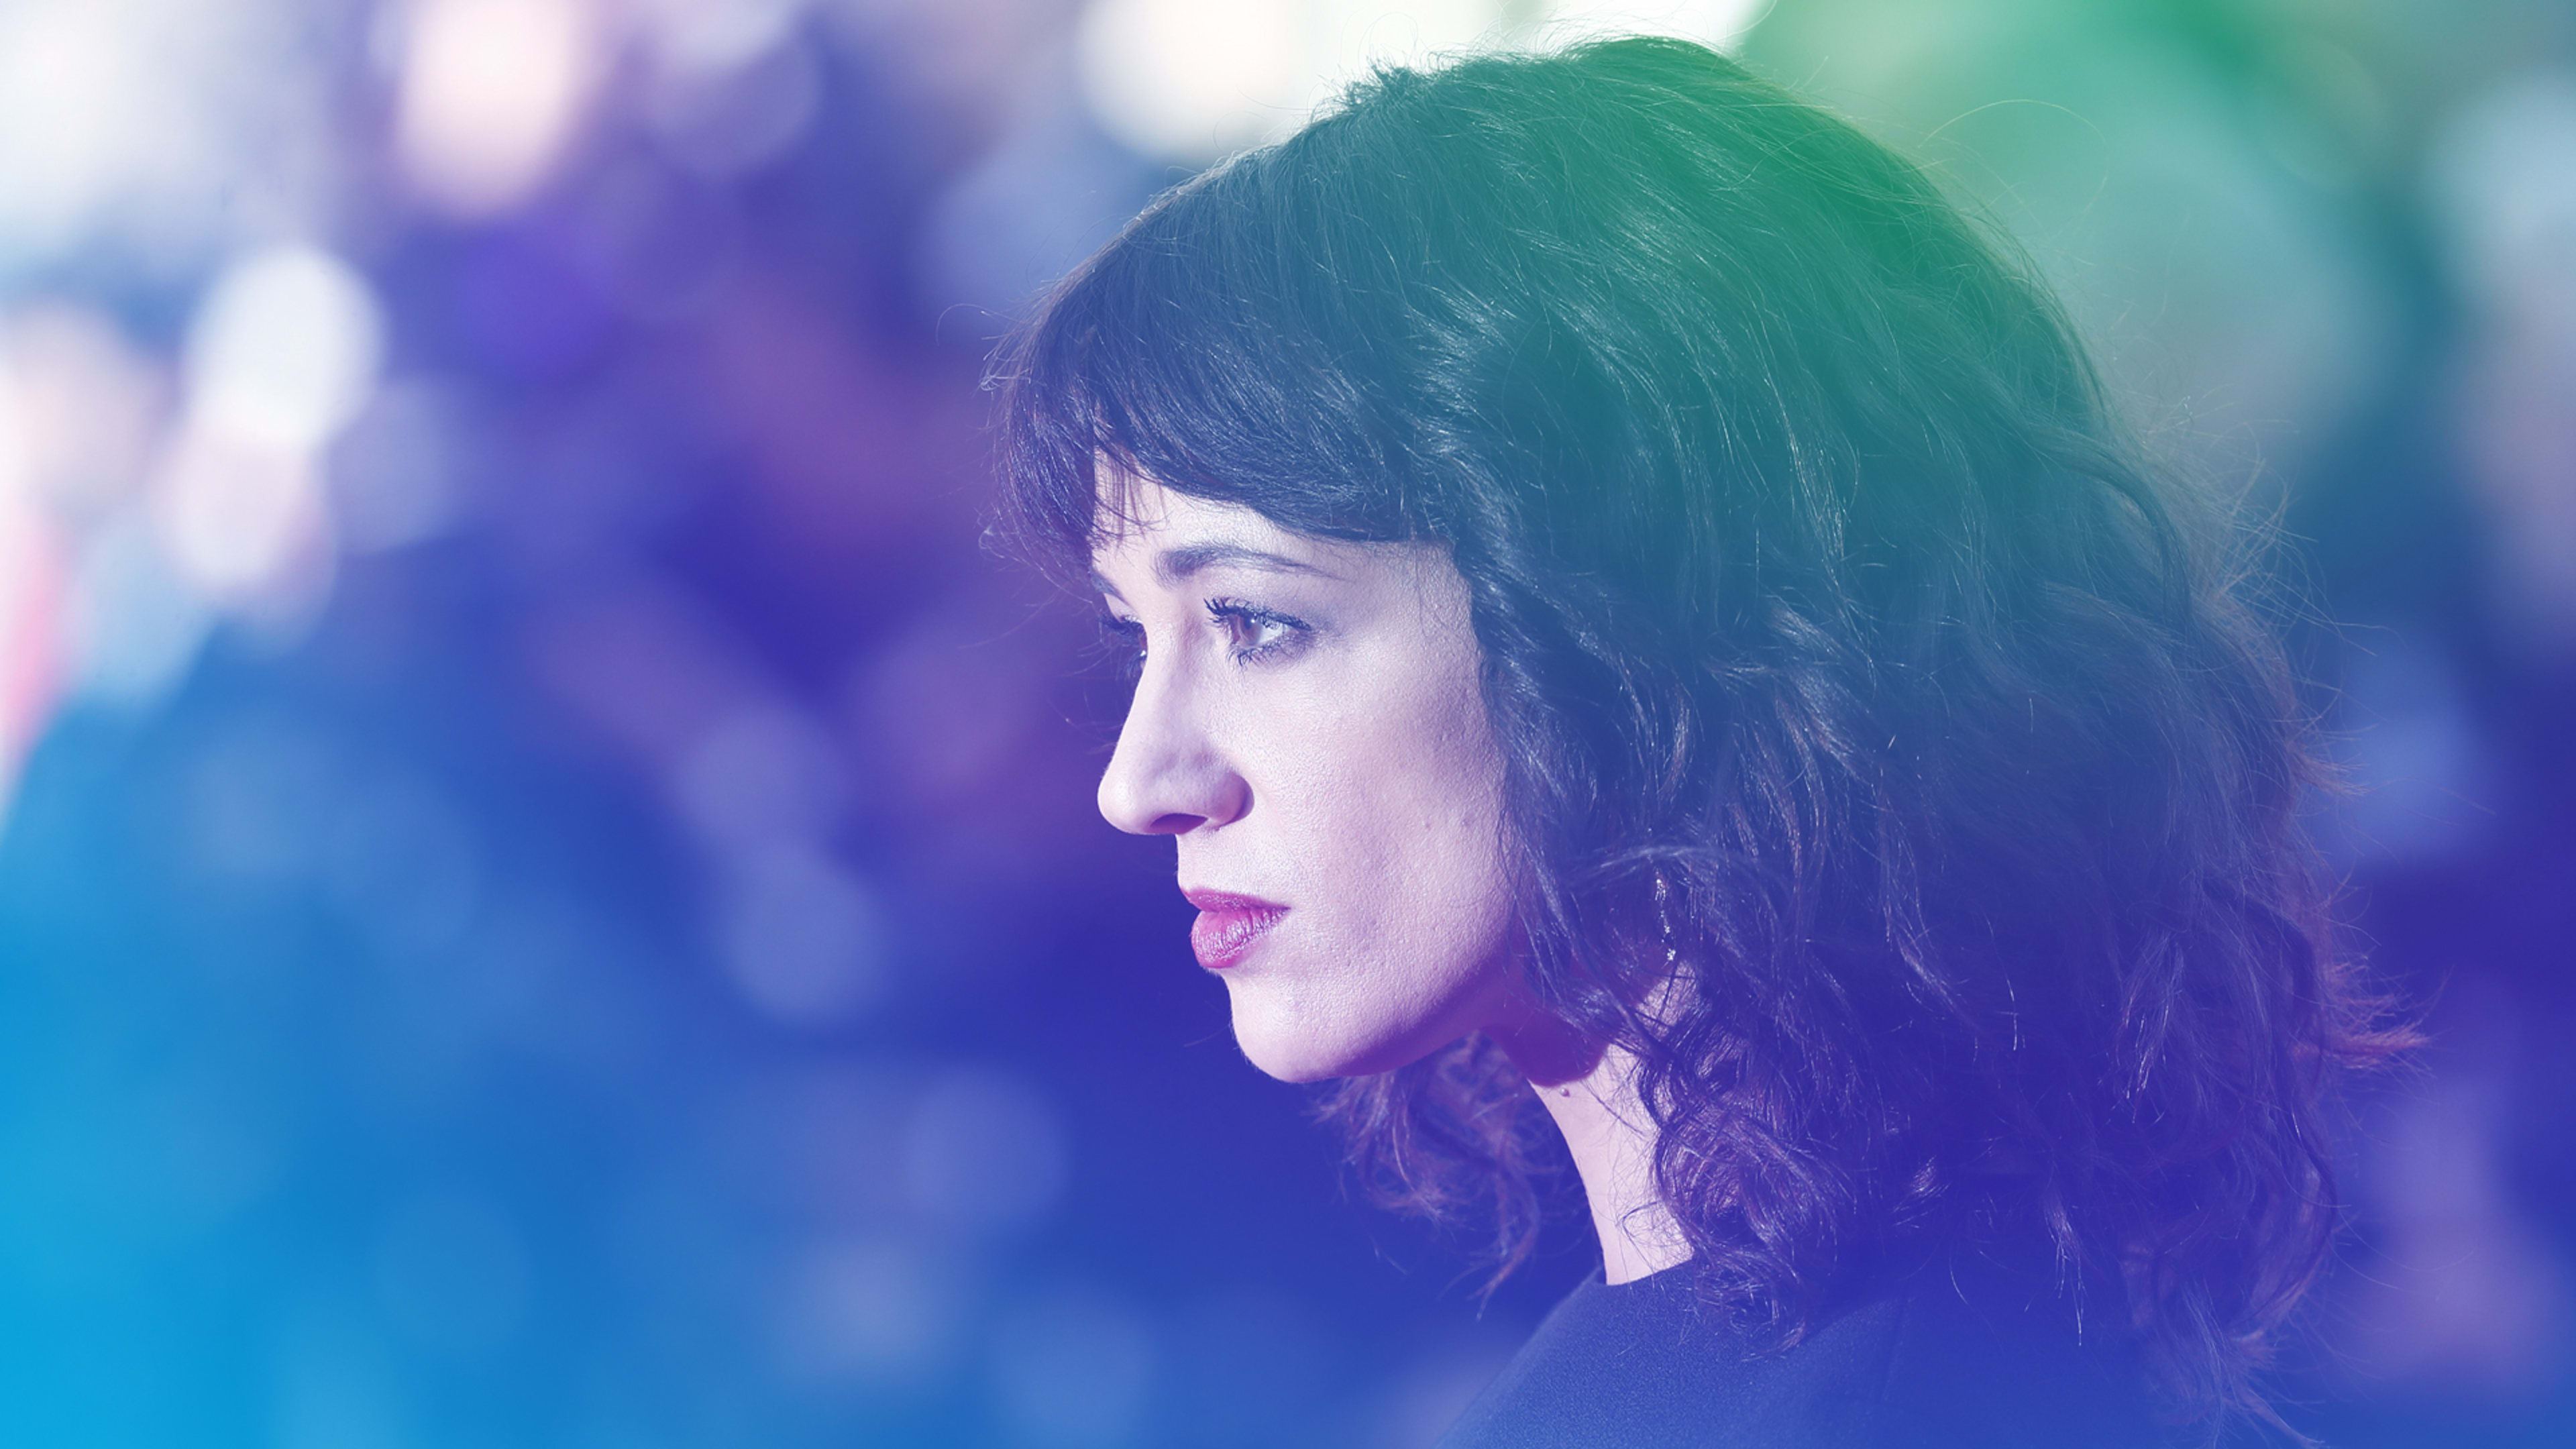 No, this Asia Argento mess is not the end of the #MeToo movement